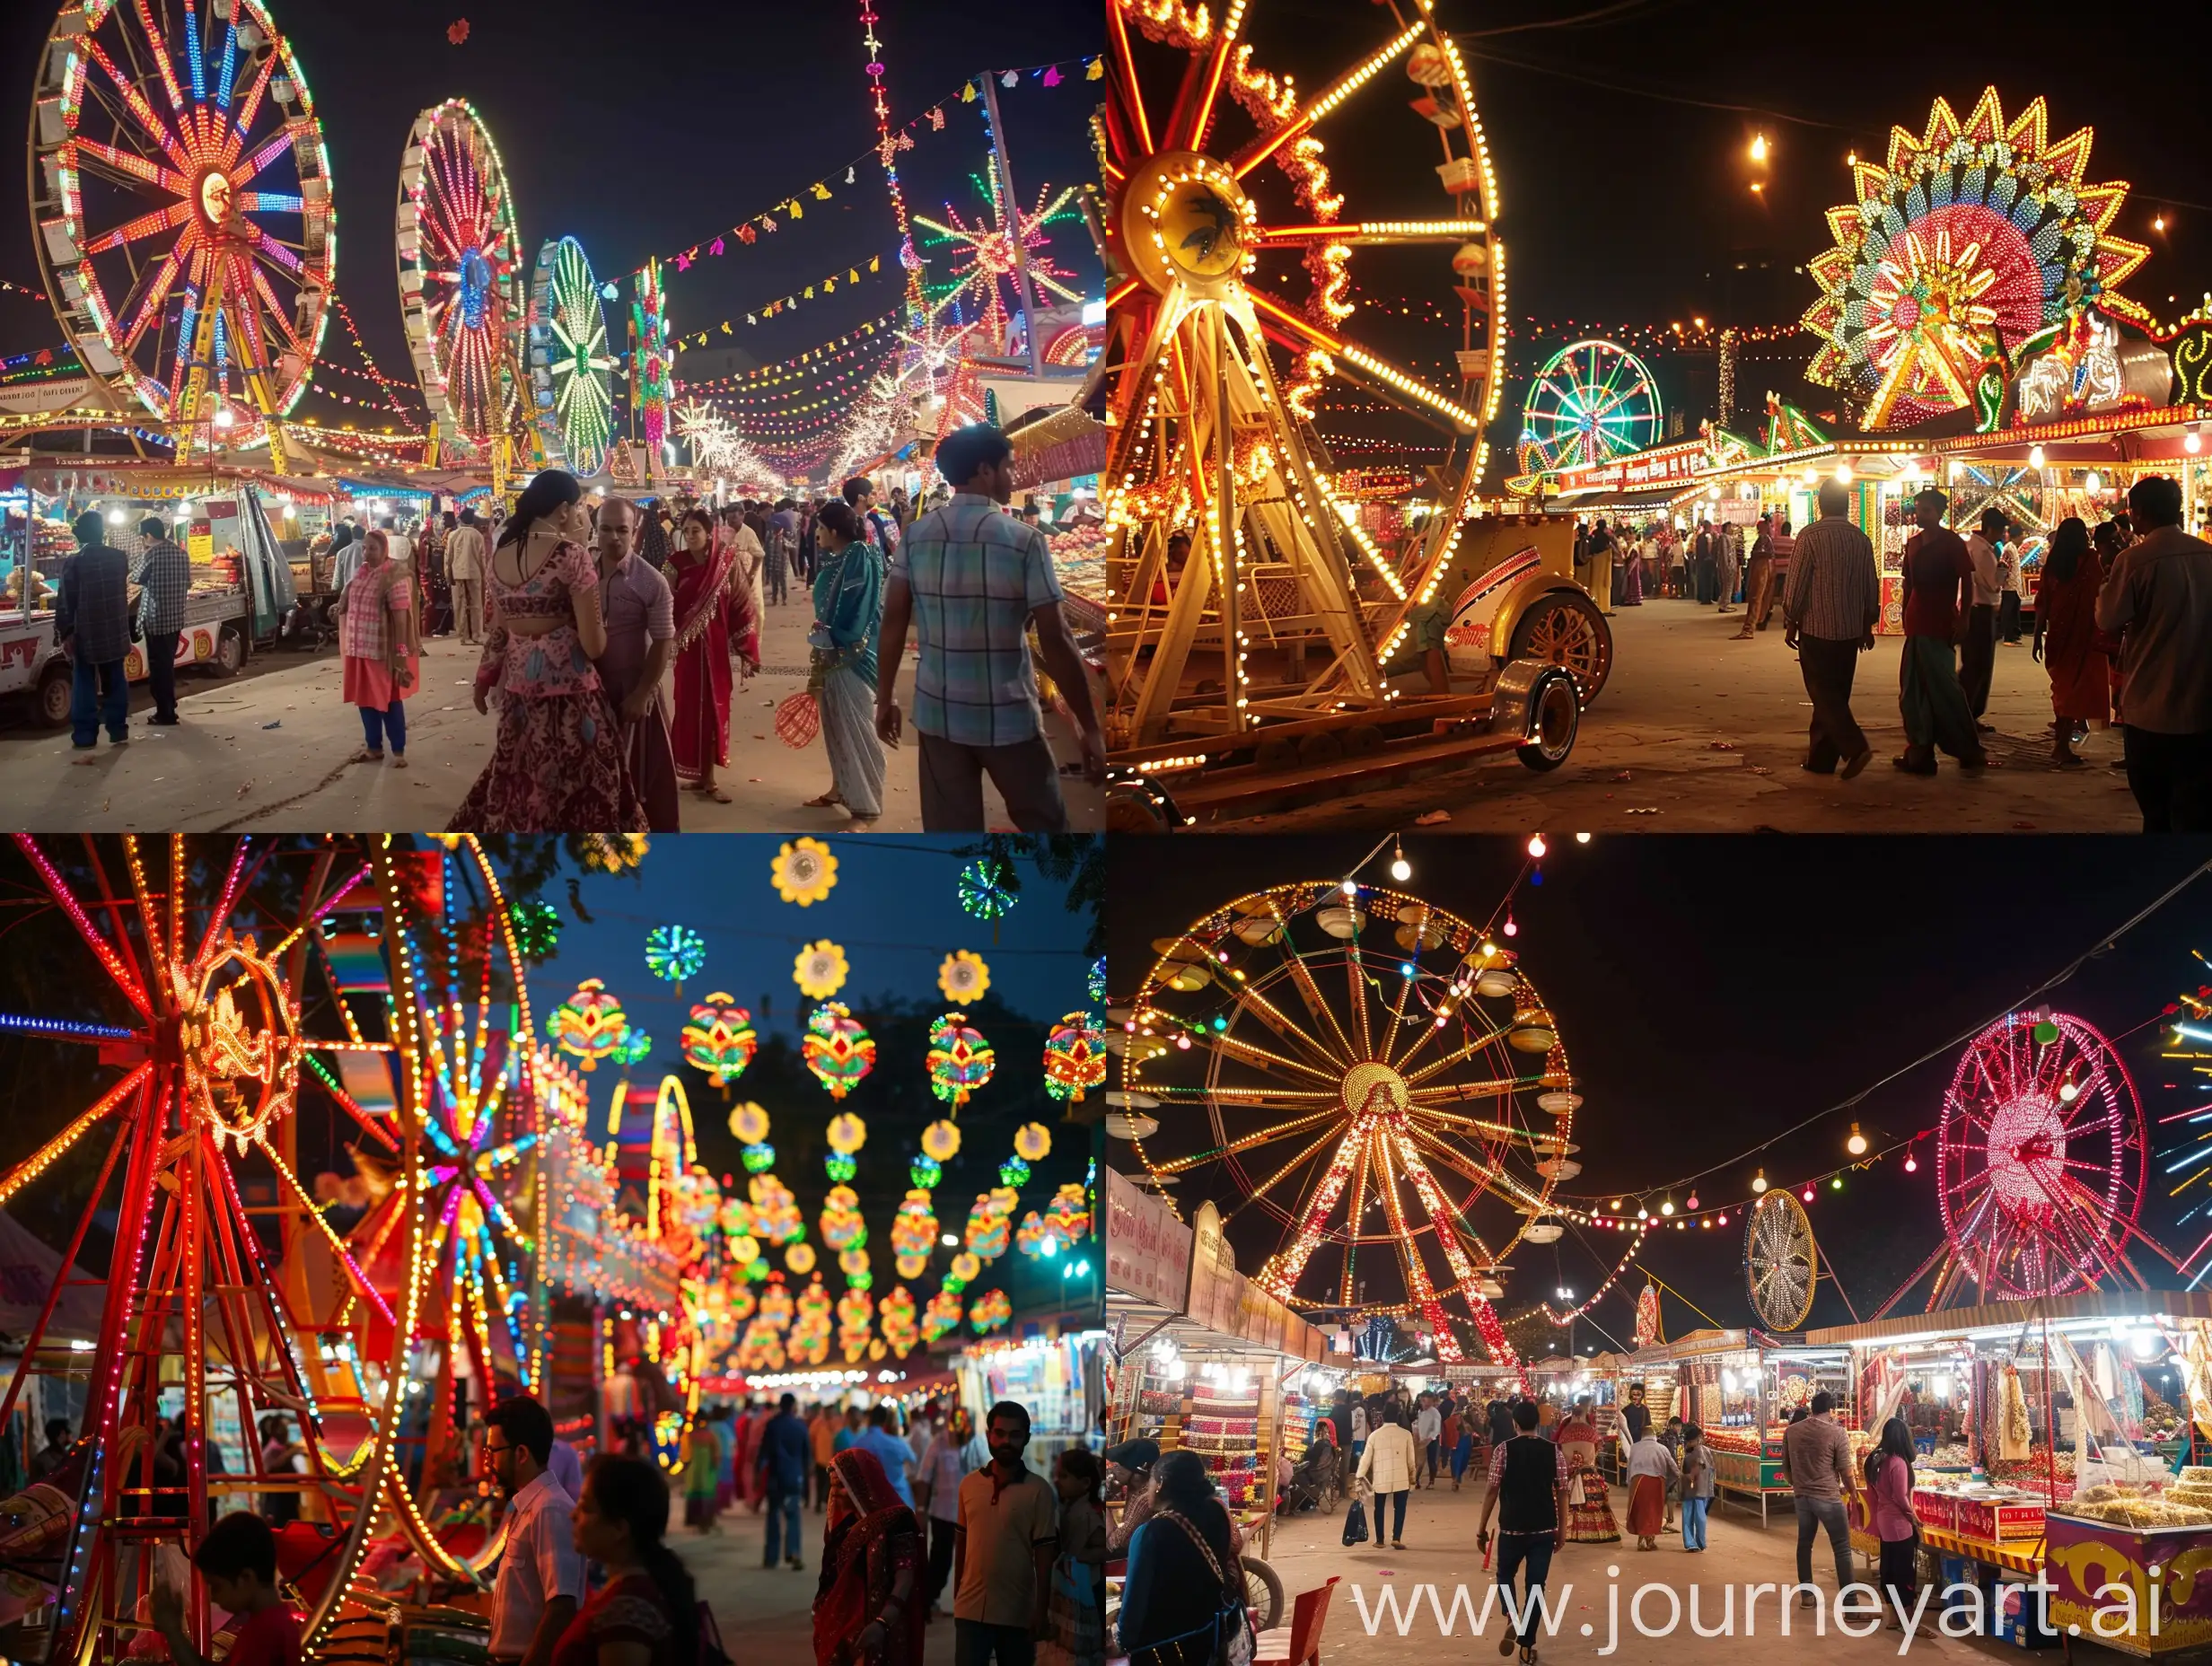 "Numaish exibition Hyderabad"  is an spectacular visual  specially at night  time with full lights  consisting of giant wheels,wide variety of food, shoping of clothes for male and female can visit  with family